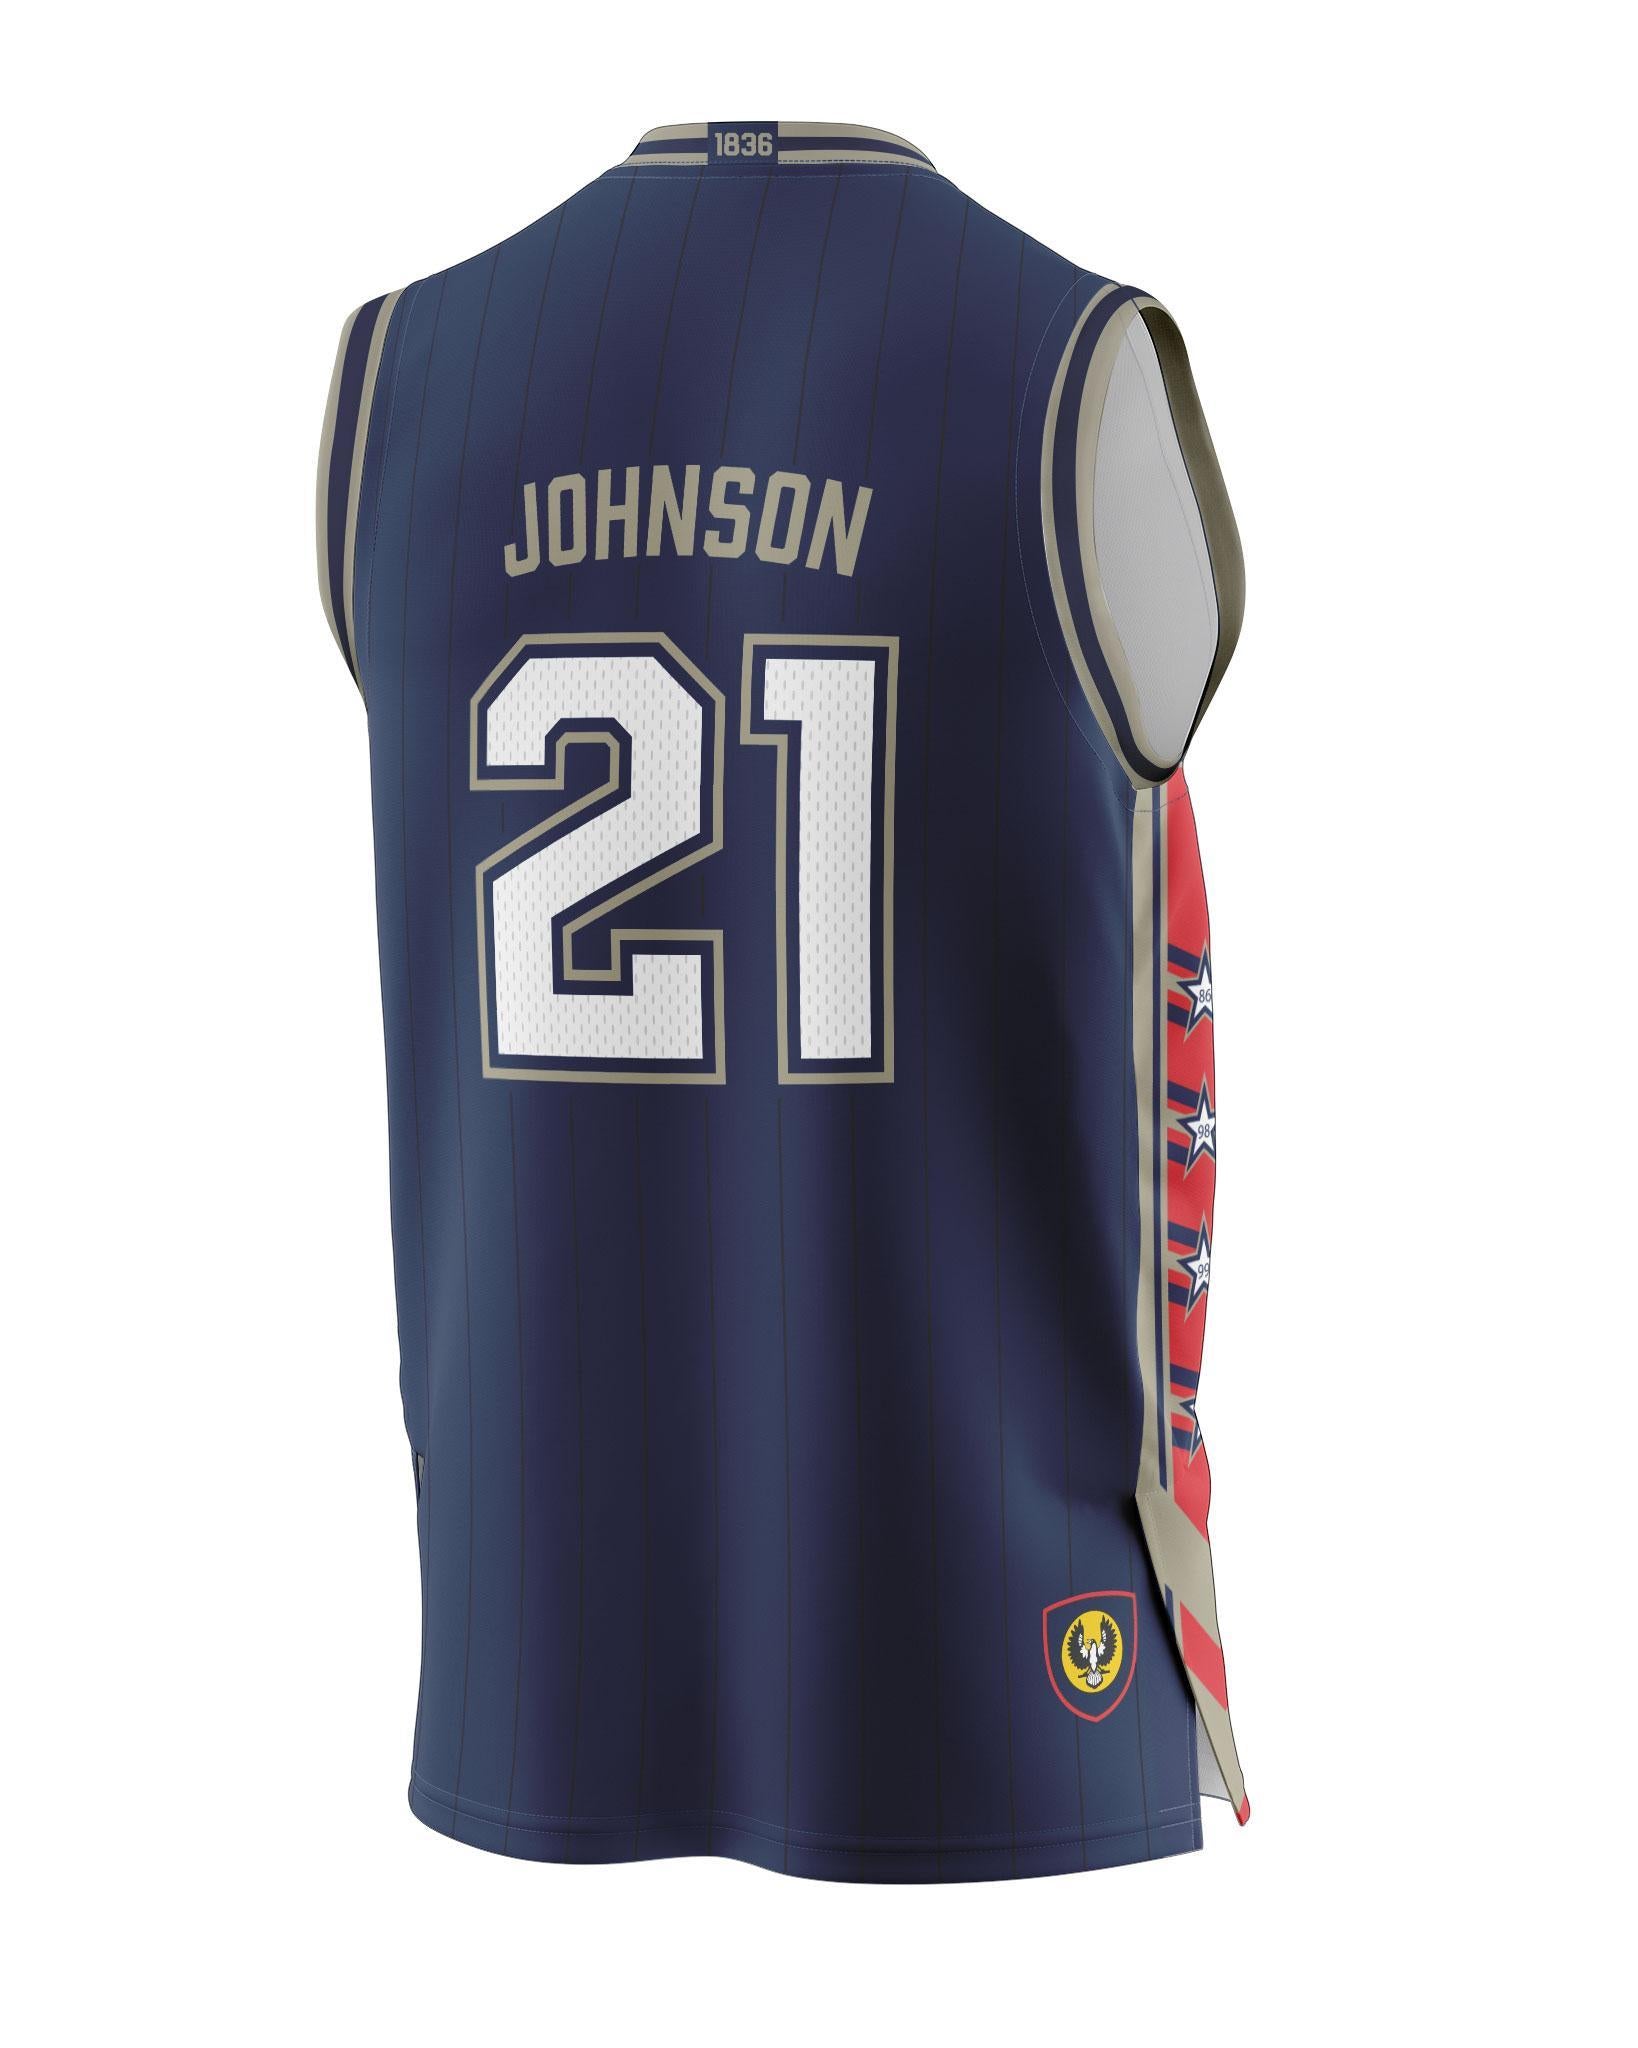 Adelaide 36ers 2021/22 Authentic Home Youth Jersey - Daniel Johnson - Adelaide 36ers